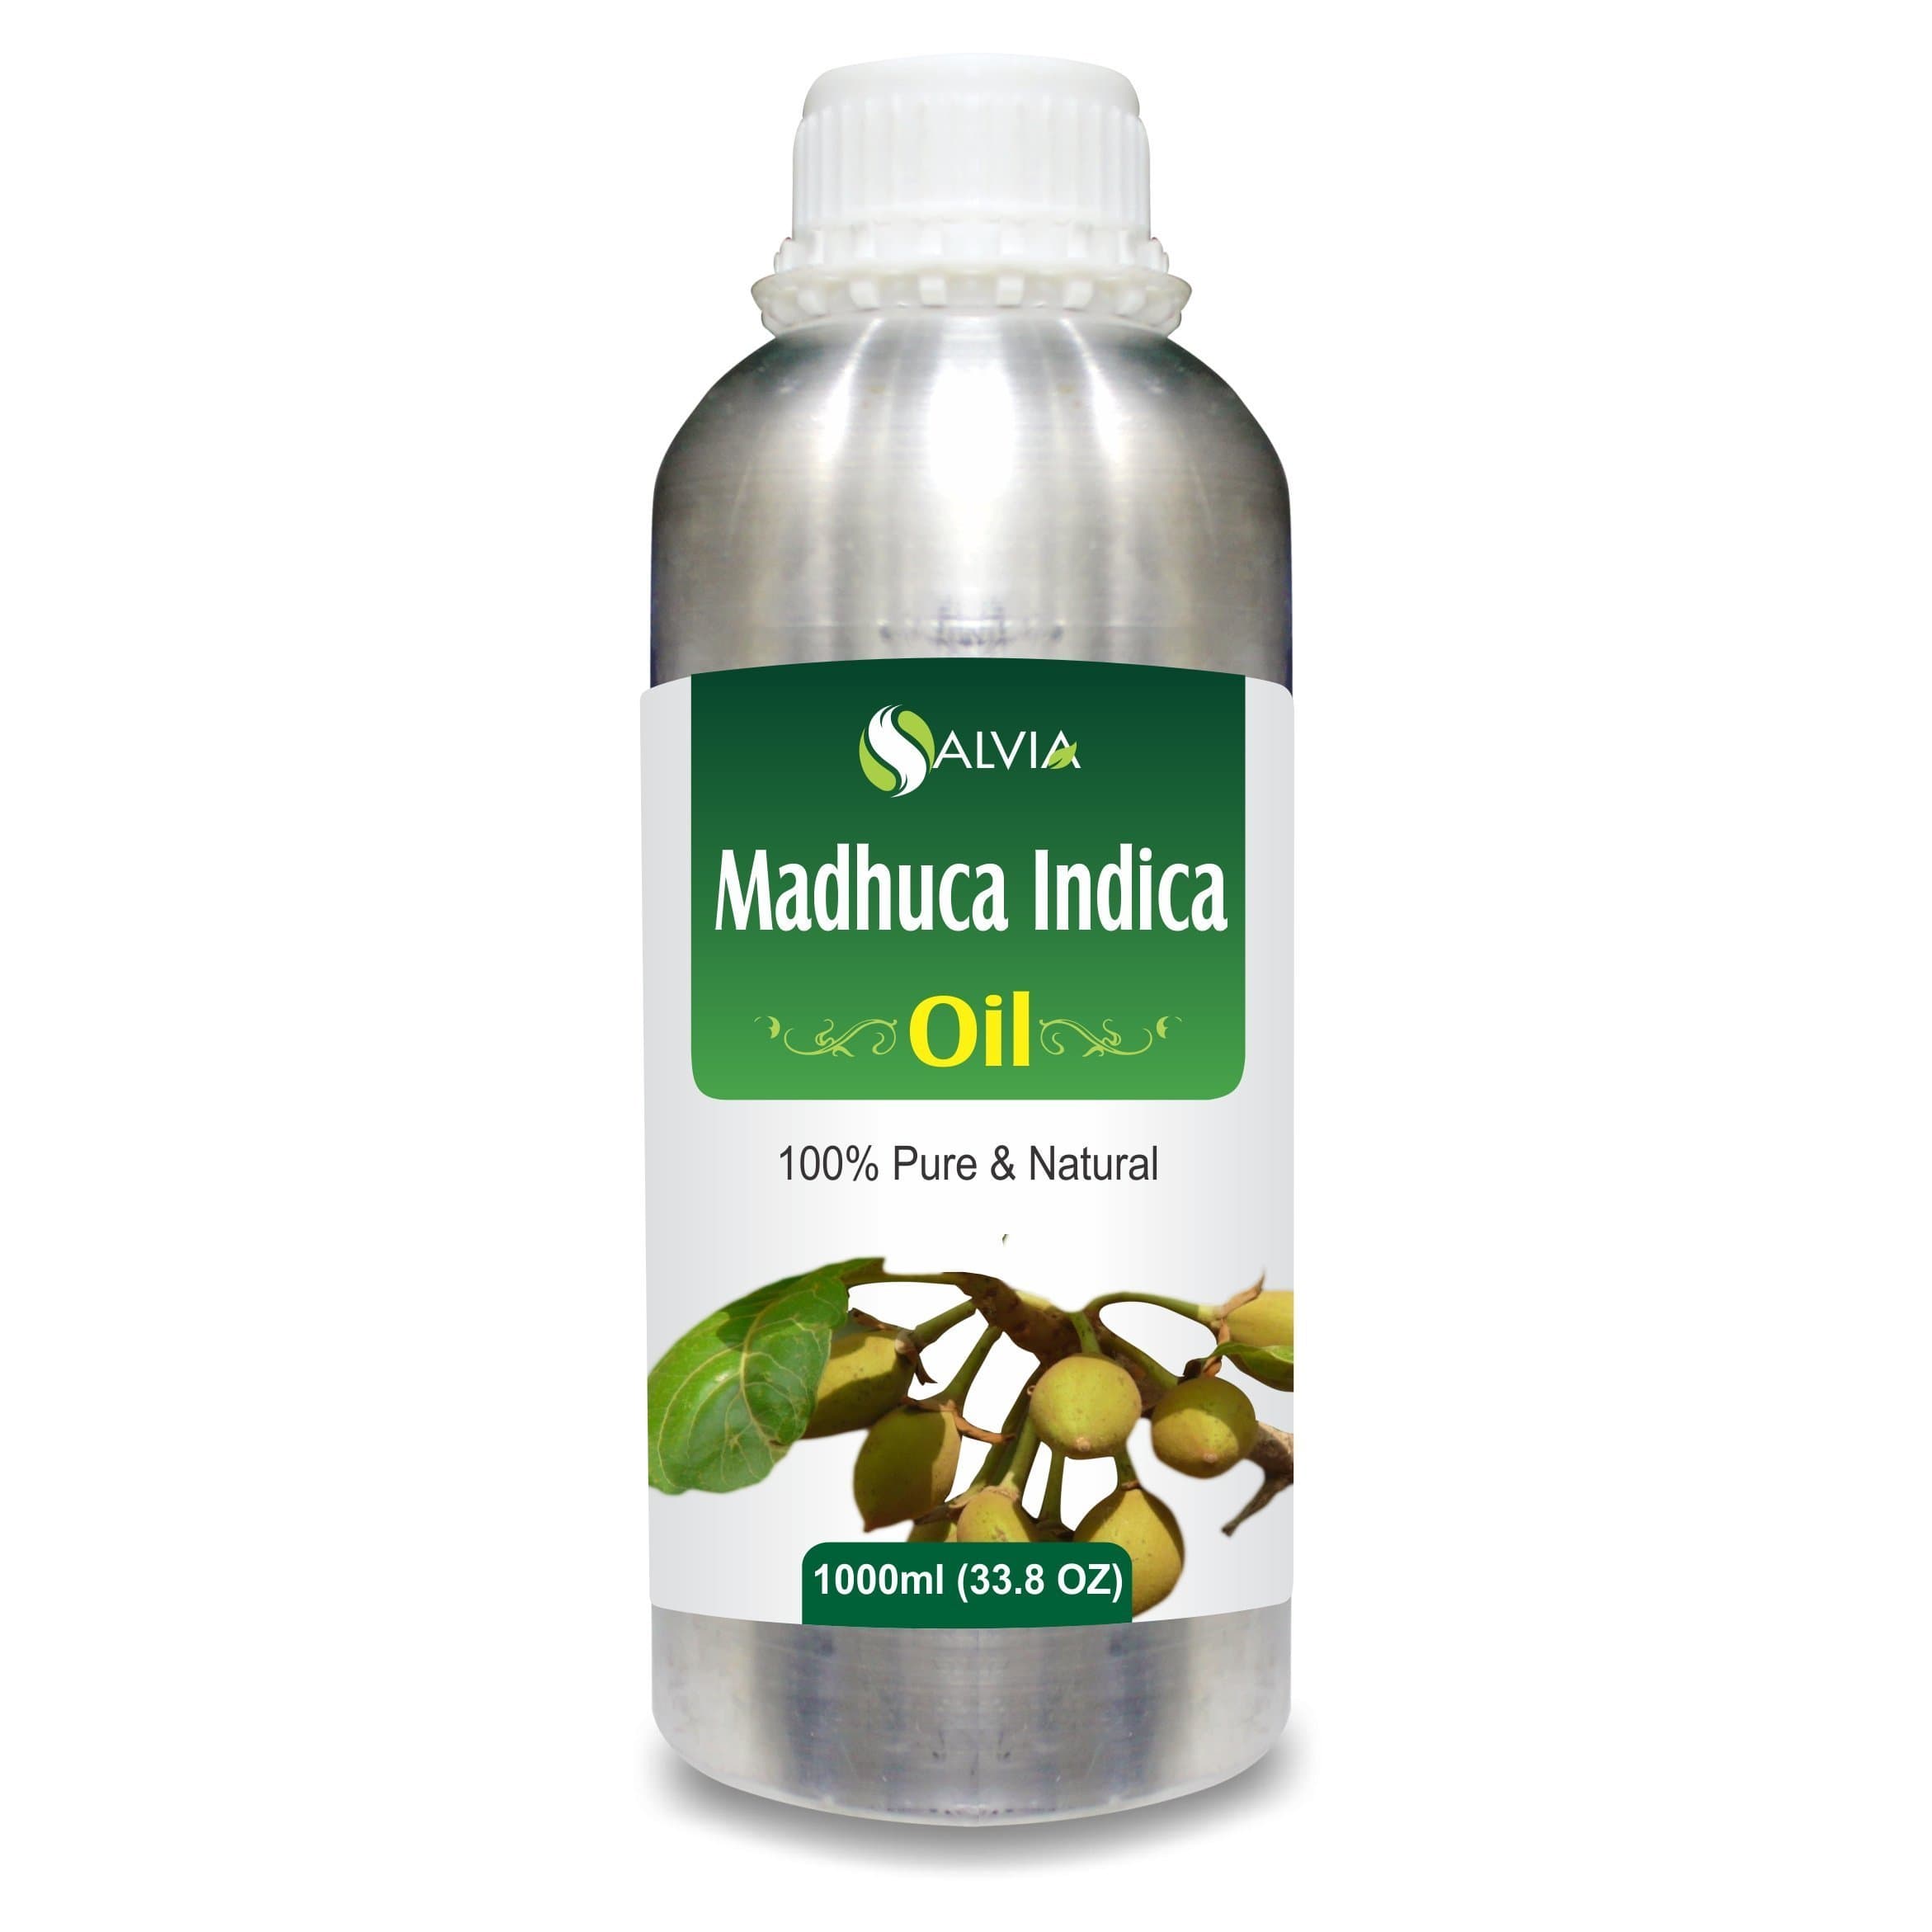 Salvia Natural Carrier Oils 1000ml Madhuca Indica Oil (Bassia Latifolia) 100% Pure & Natural Carrier Oil Improves Skin Health, Mosquito Repellent, Reduces Joint Pain